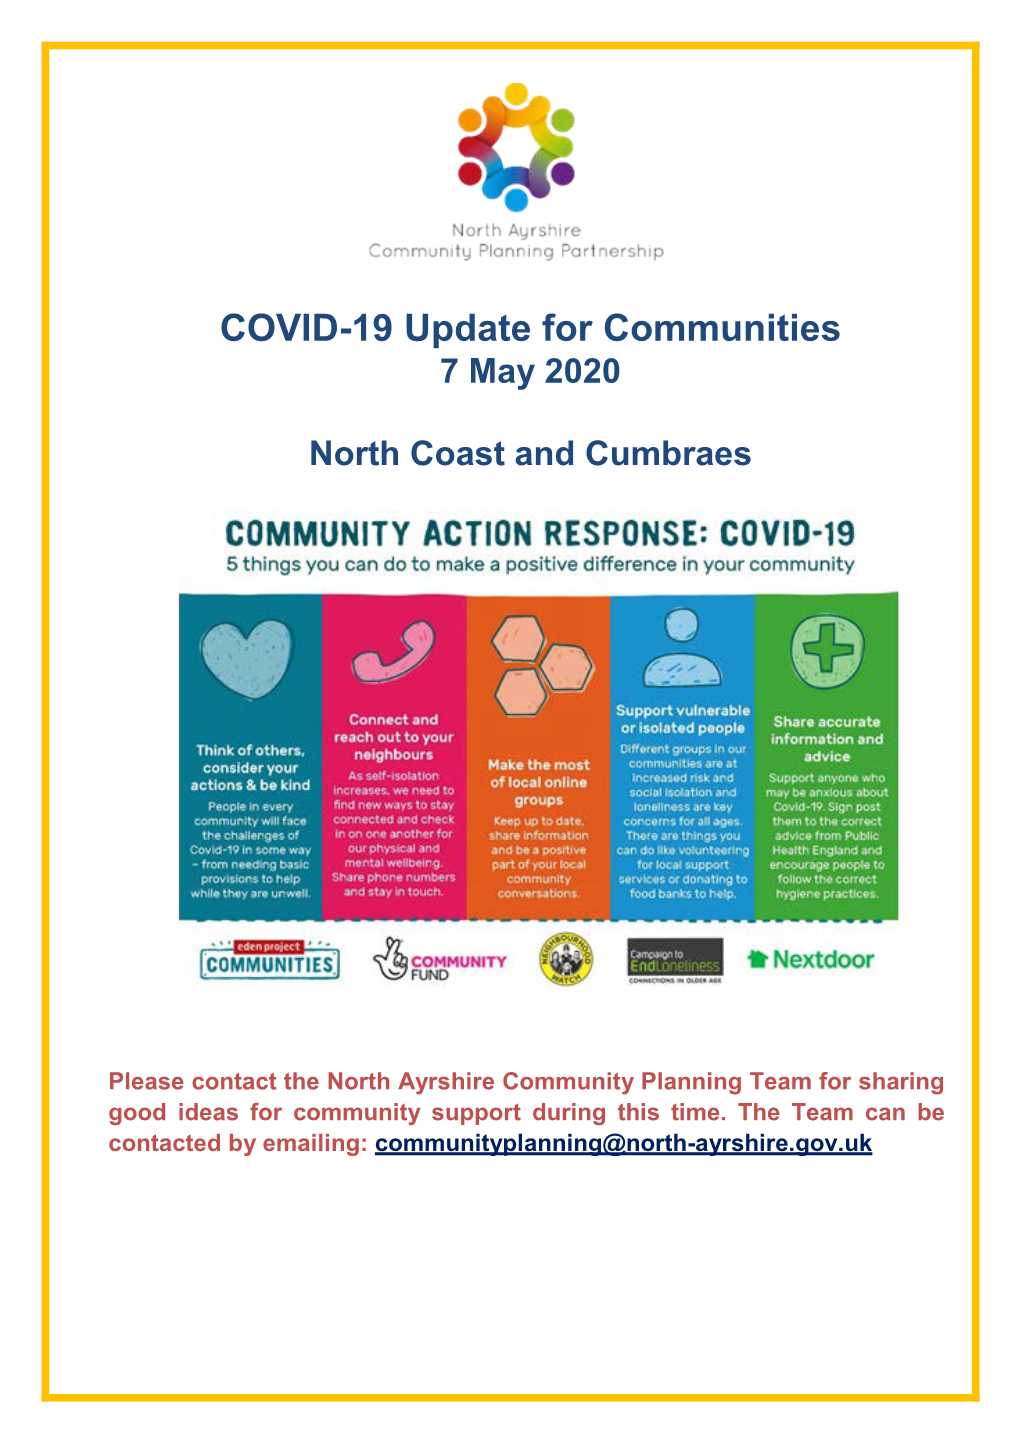 COVID-19 Update for Communities 7 May 2020